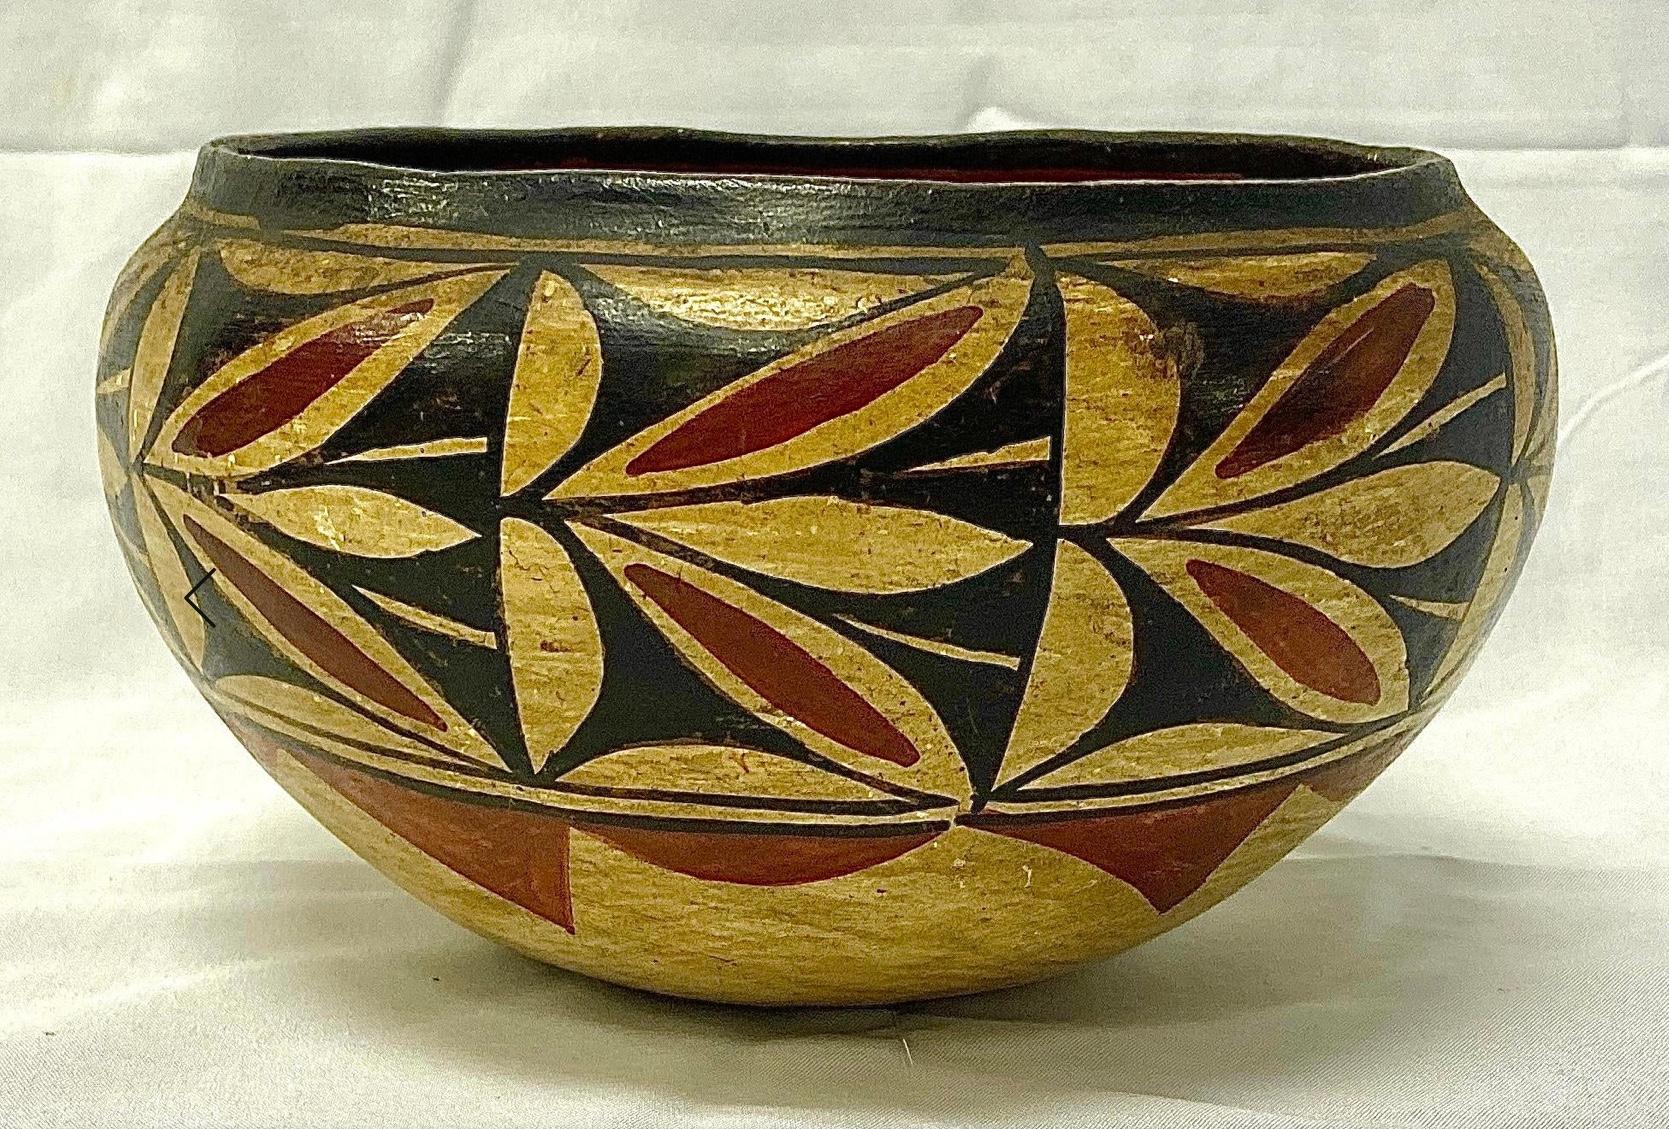 Vintage 19th Century (1870's) Acoma Native American Bowl. Painted light brown, red and black with red clay coloring on inside.